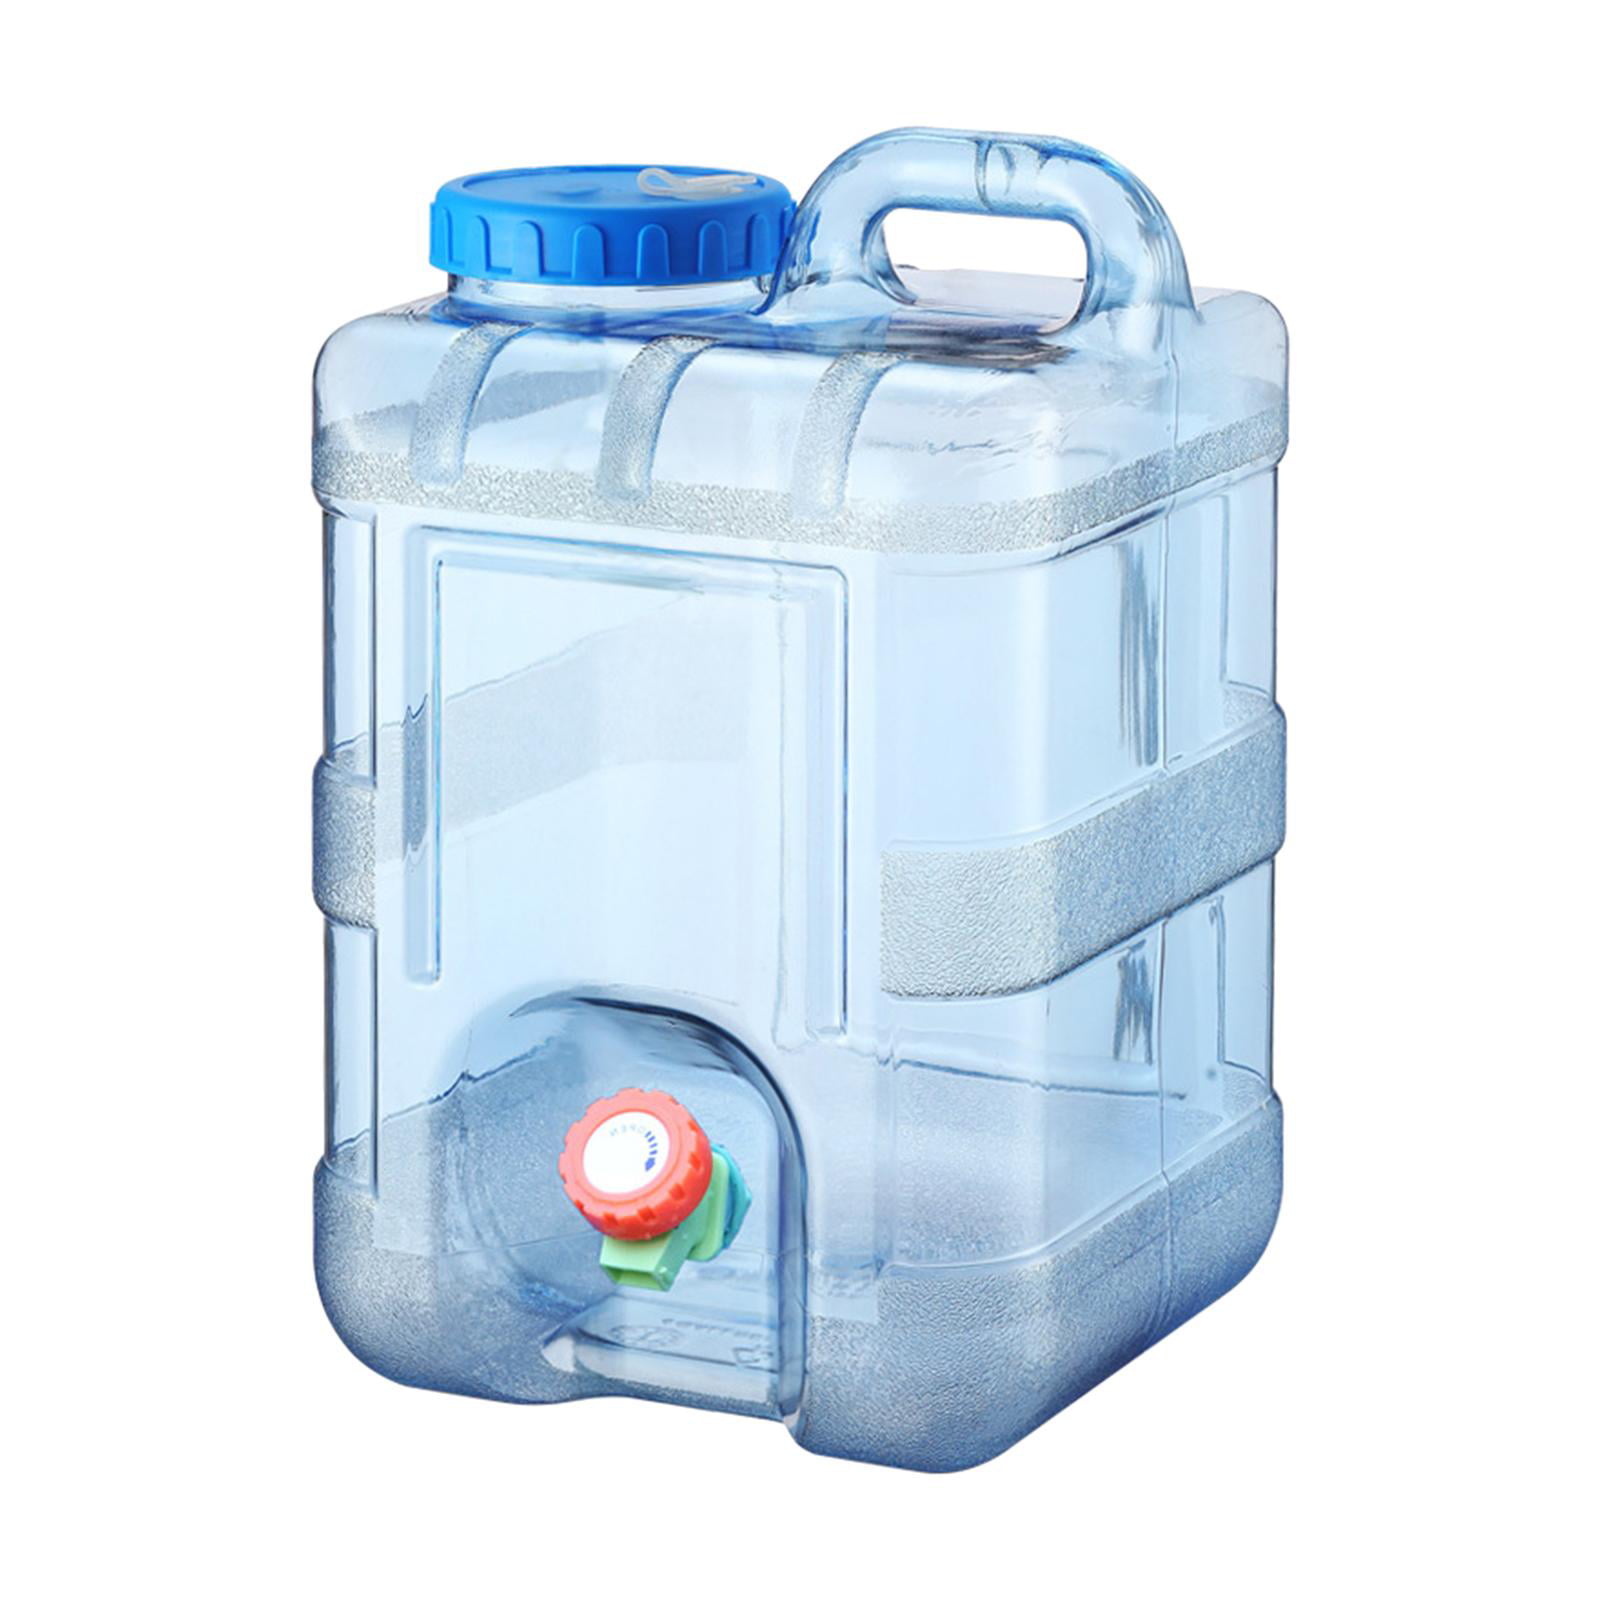 Water Container with Spigot, Portable Water Storage Containers with Spout  for Camping BBQ Party Gard…See more Water Container with Spigot, Portable